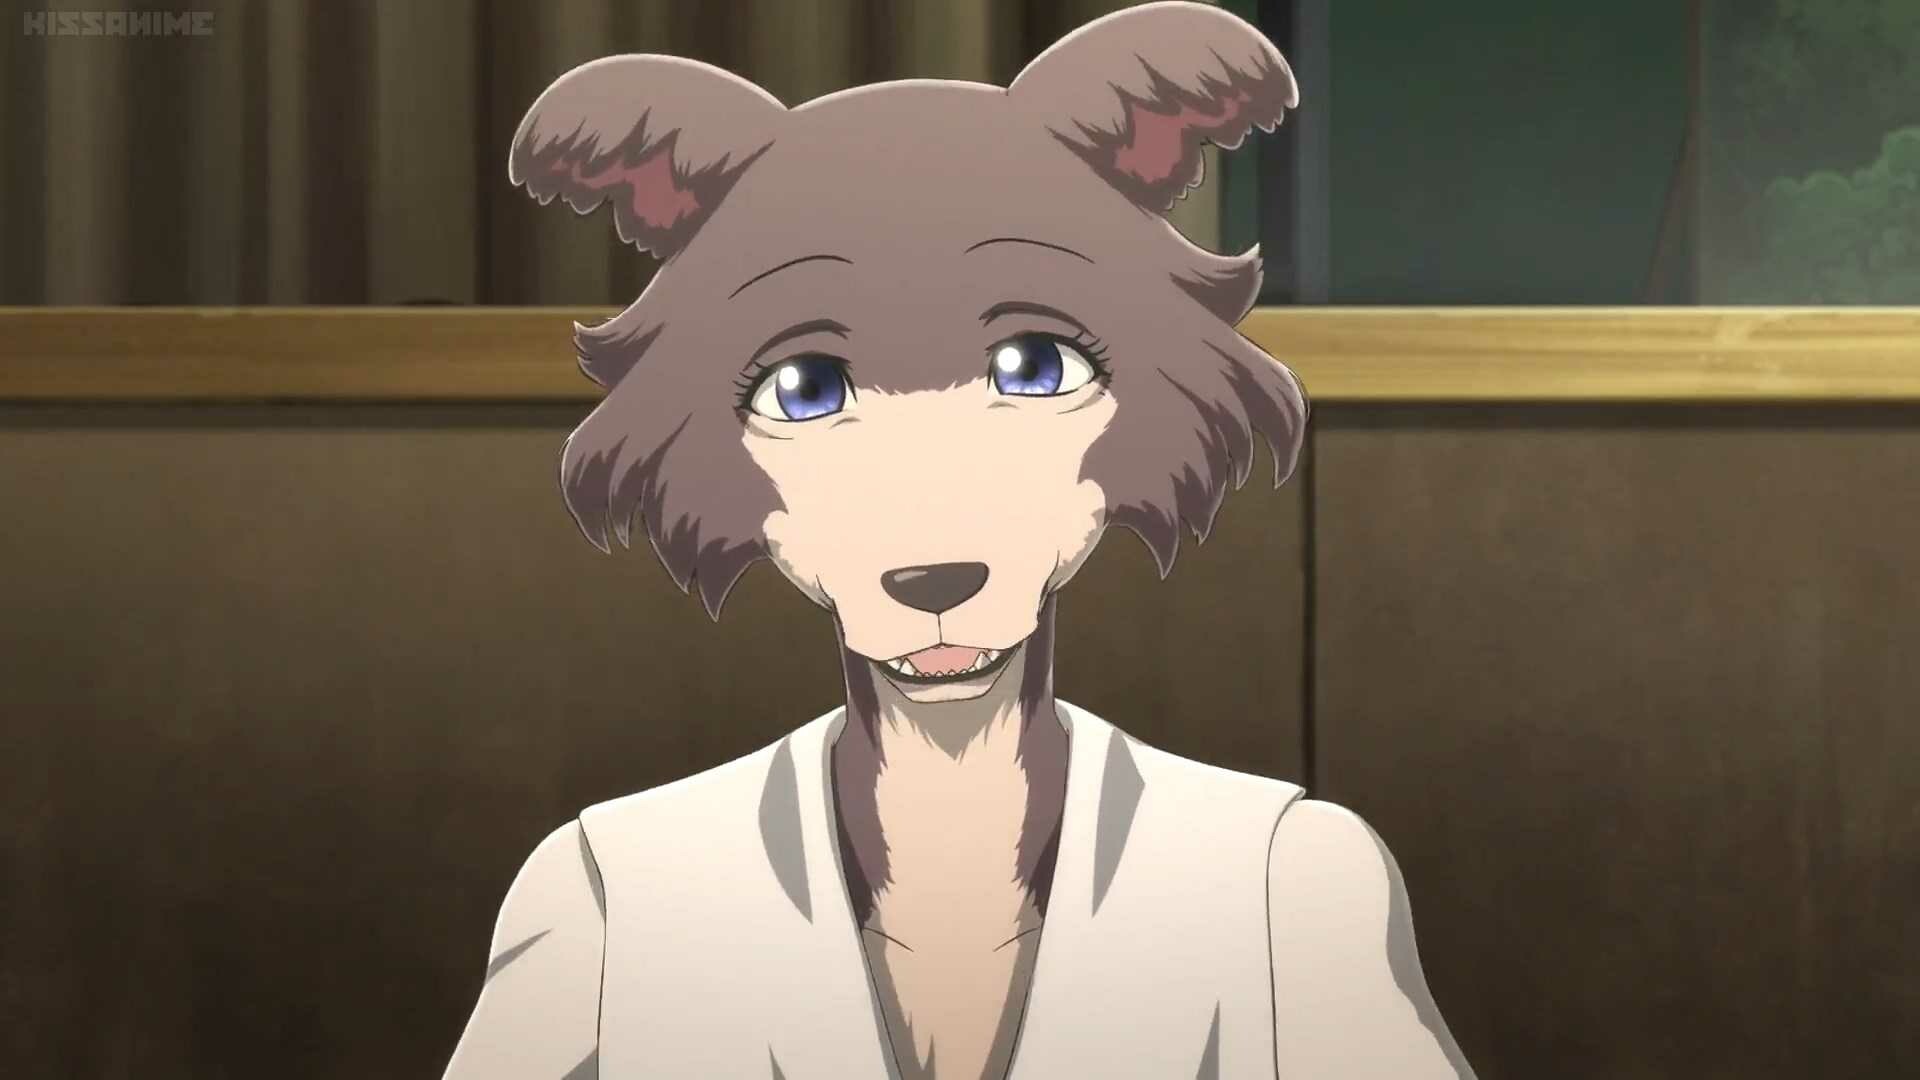 BEASTARS: Juno, One of the supporting characters, Voiced by Atsumi Tanezaki. 1920x1080 Full HD Wallpaper.